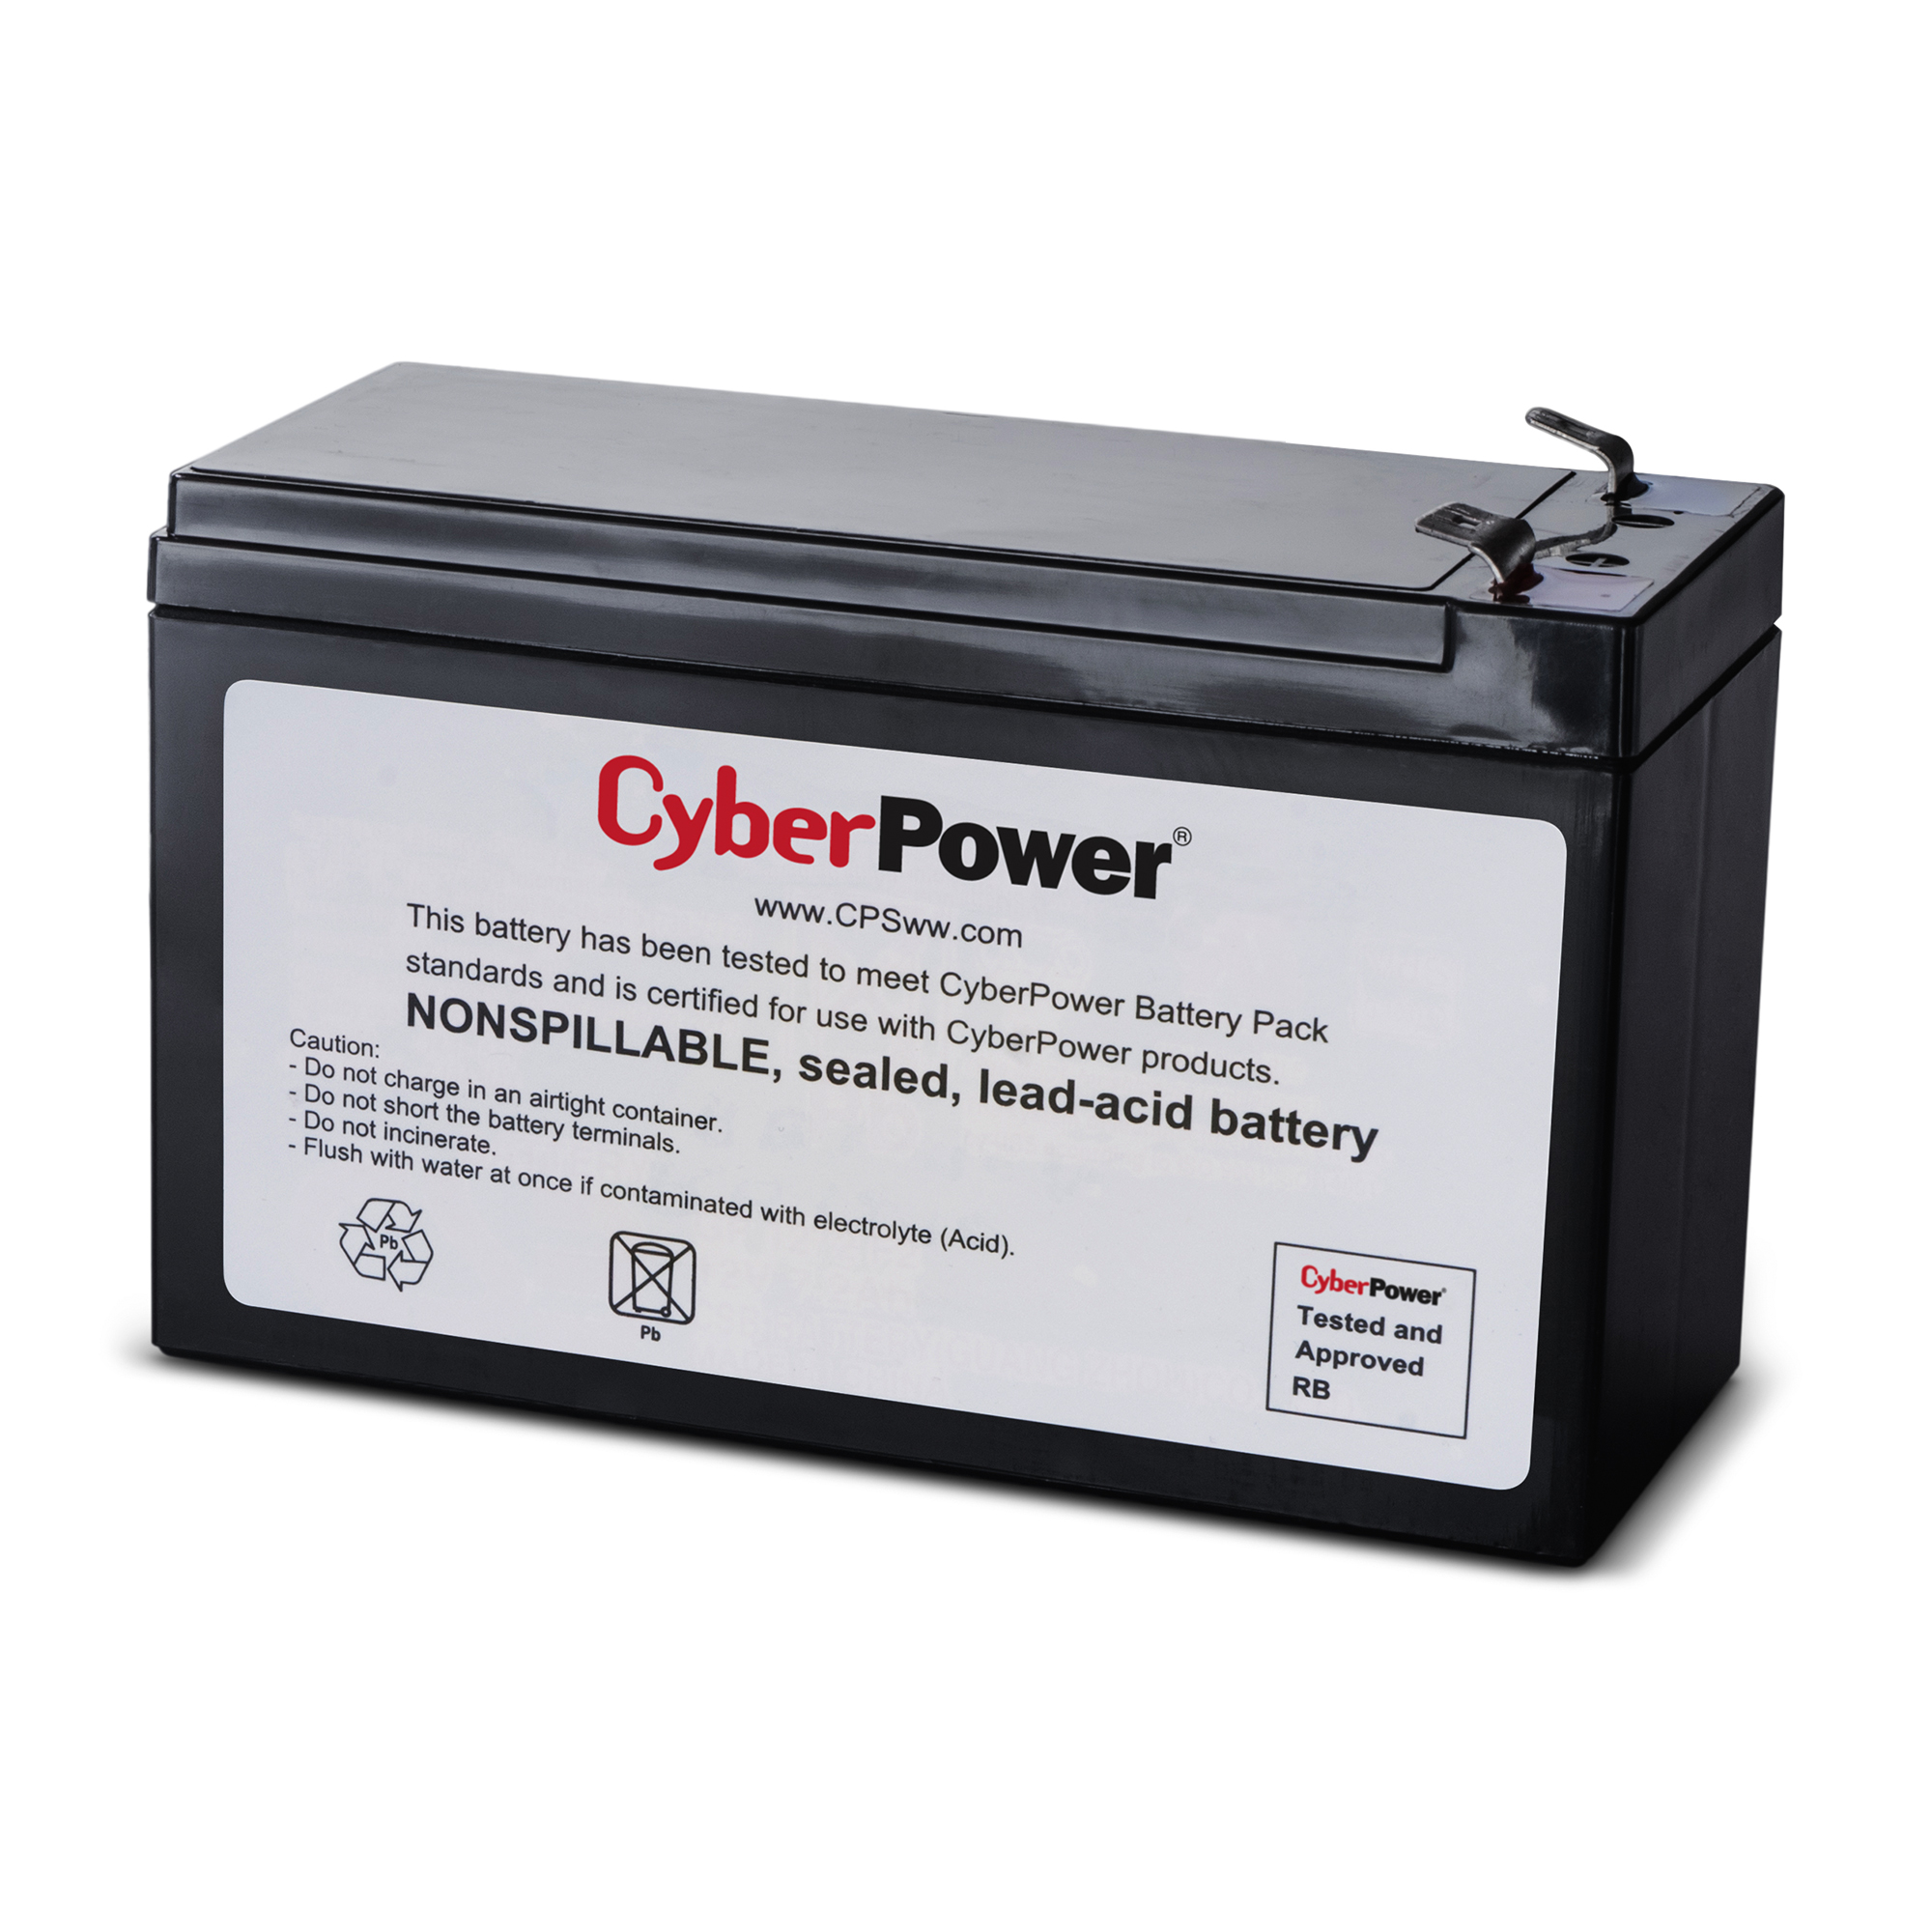 Sealed battery. CYBERPOWER rb1290x4d. CYBERPOWER 1350avr аккумулятор. Аккумуляторная батарея rbp0119. CYBERPOWER 1350avr Battery Replacement.